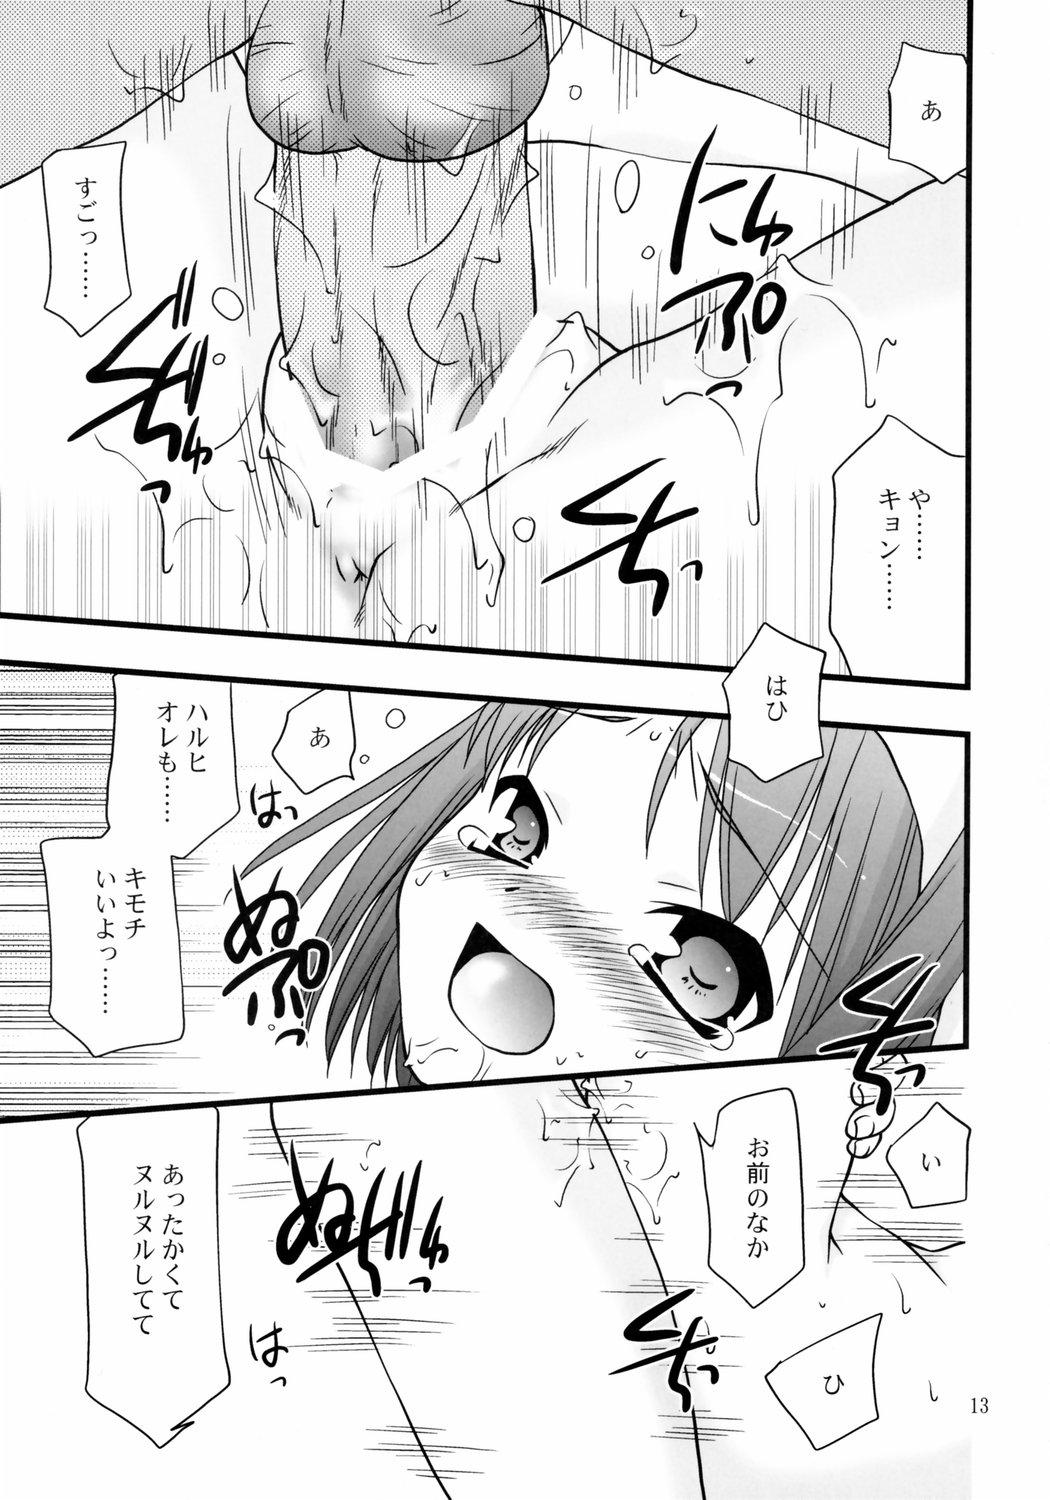 Police Super Oppai Suplex! - The melancholy of haruhi suzumiya Blowjobs - Page 12